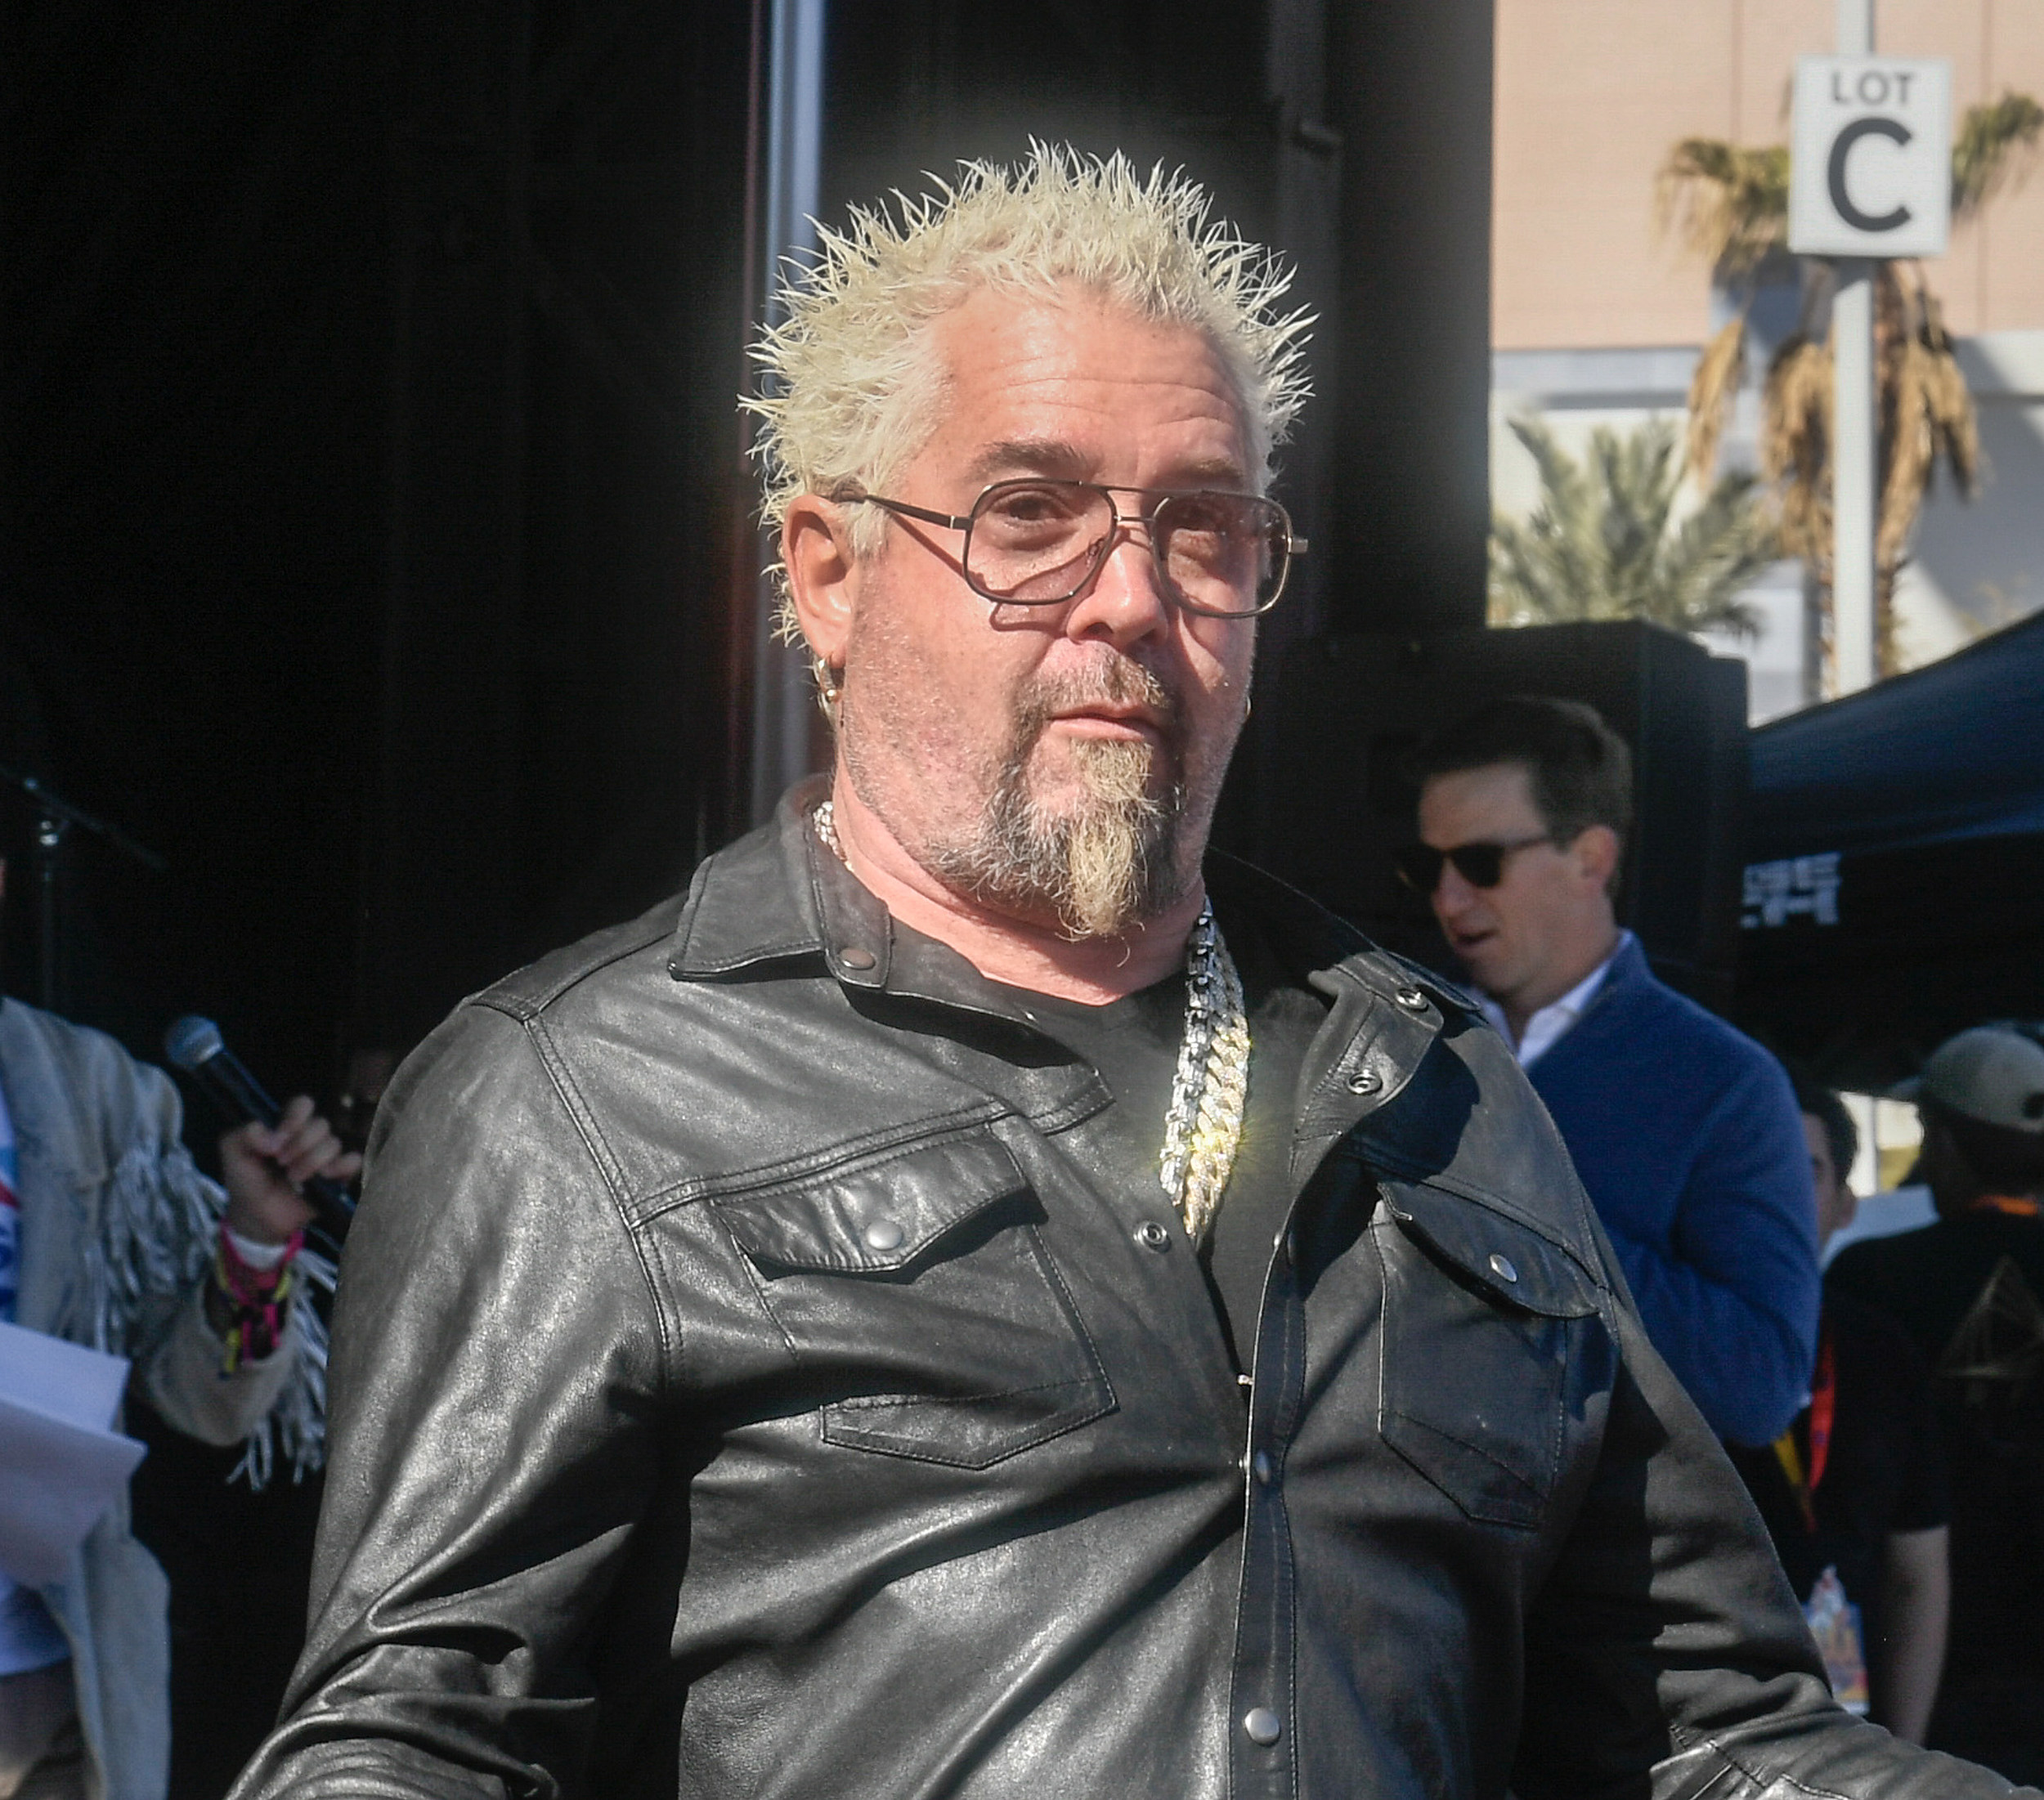 Guy Fieri Says You Must Try these New Jersey Restaurants from Diners,
Drive-Ins and Dives